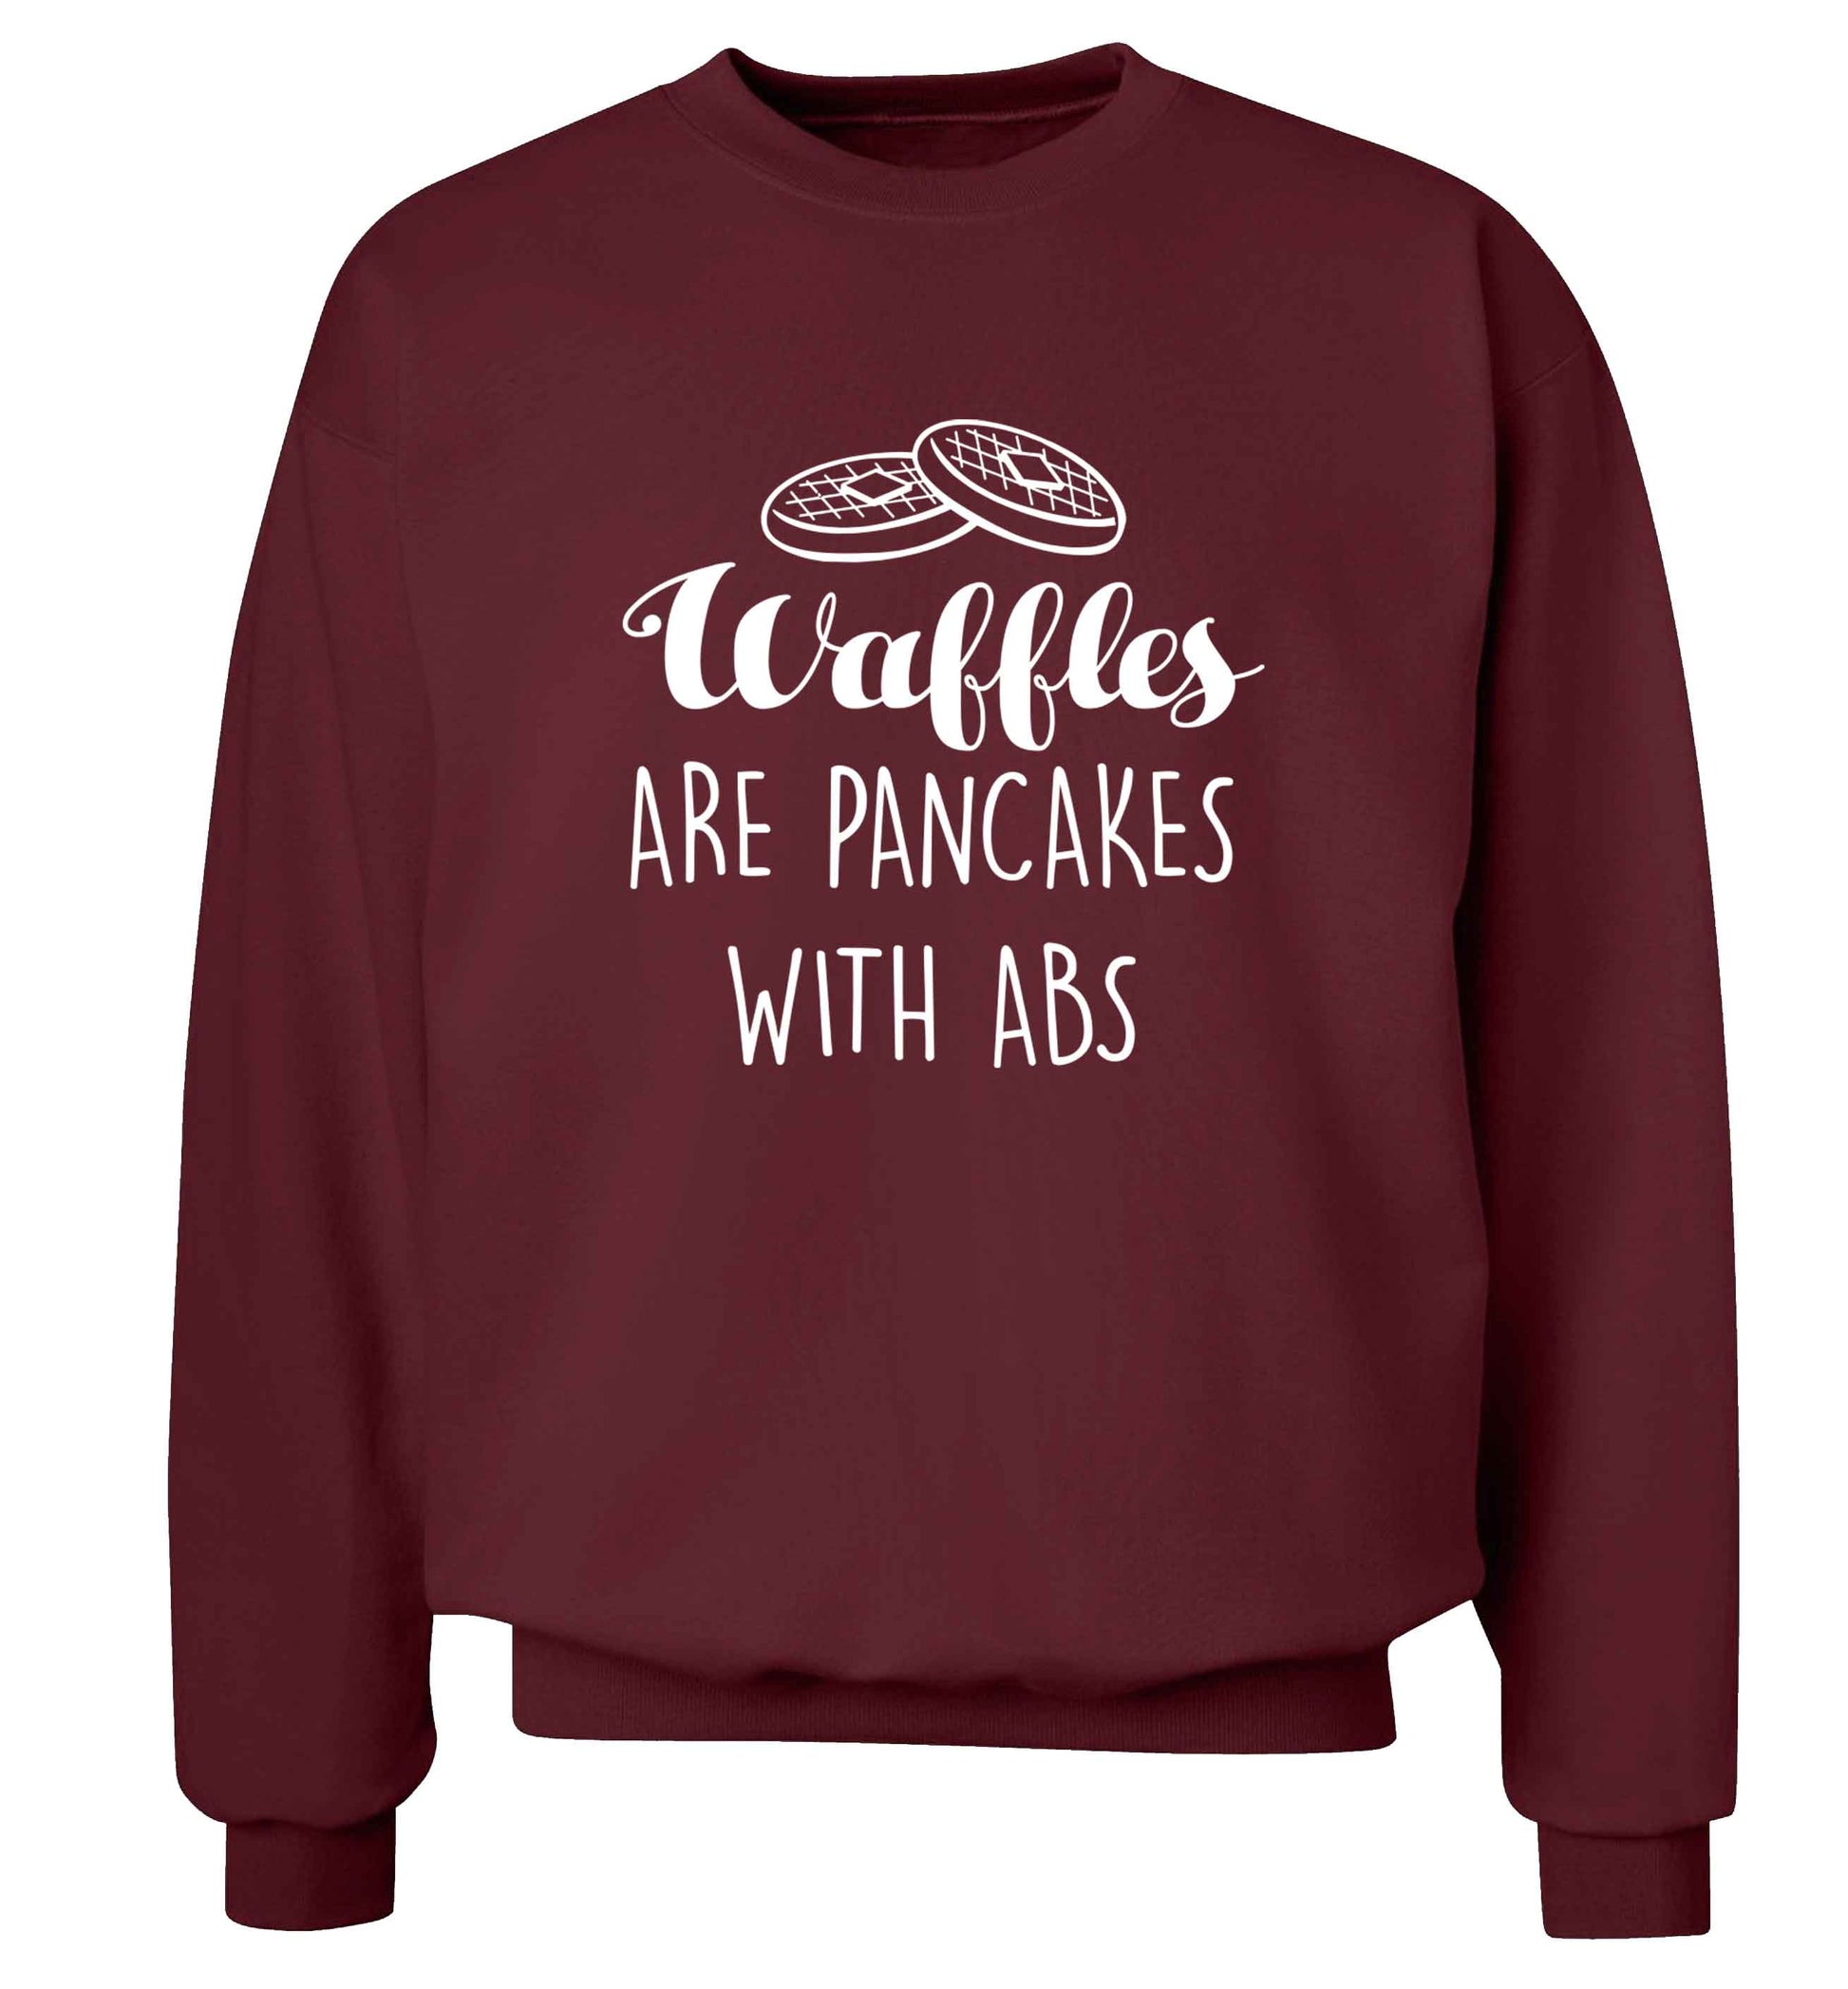 Waffles are just pancakes with abs adult's unisex maroon sweater 2XL